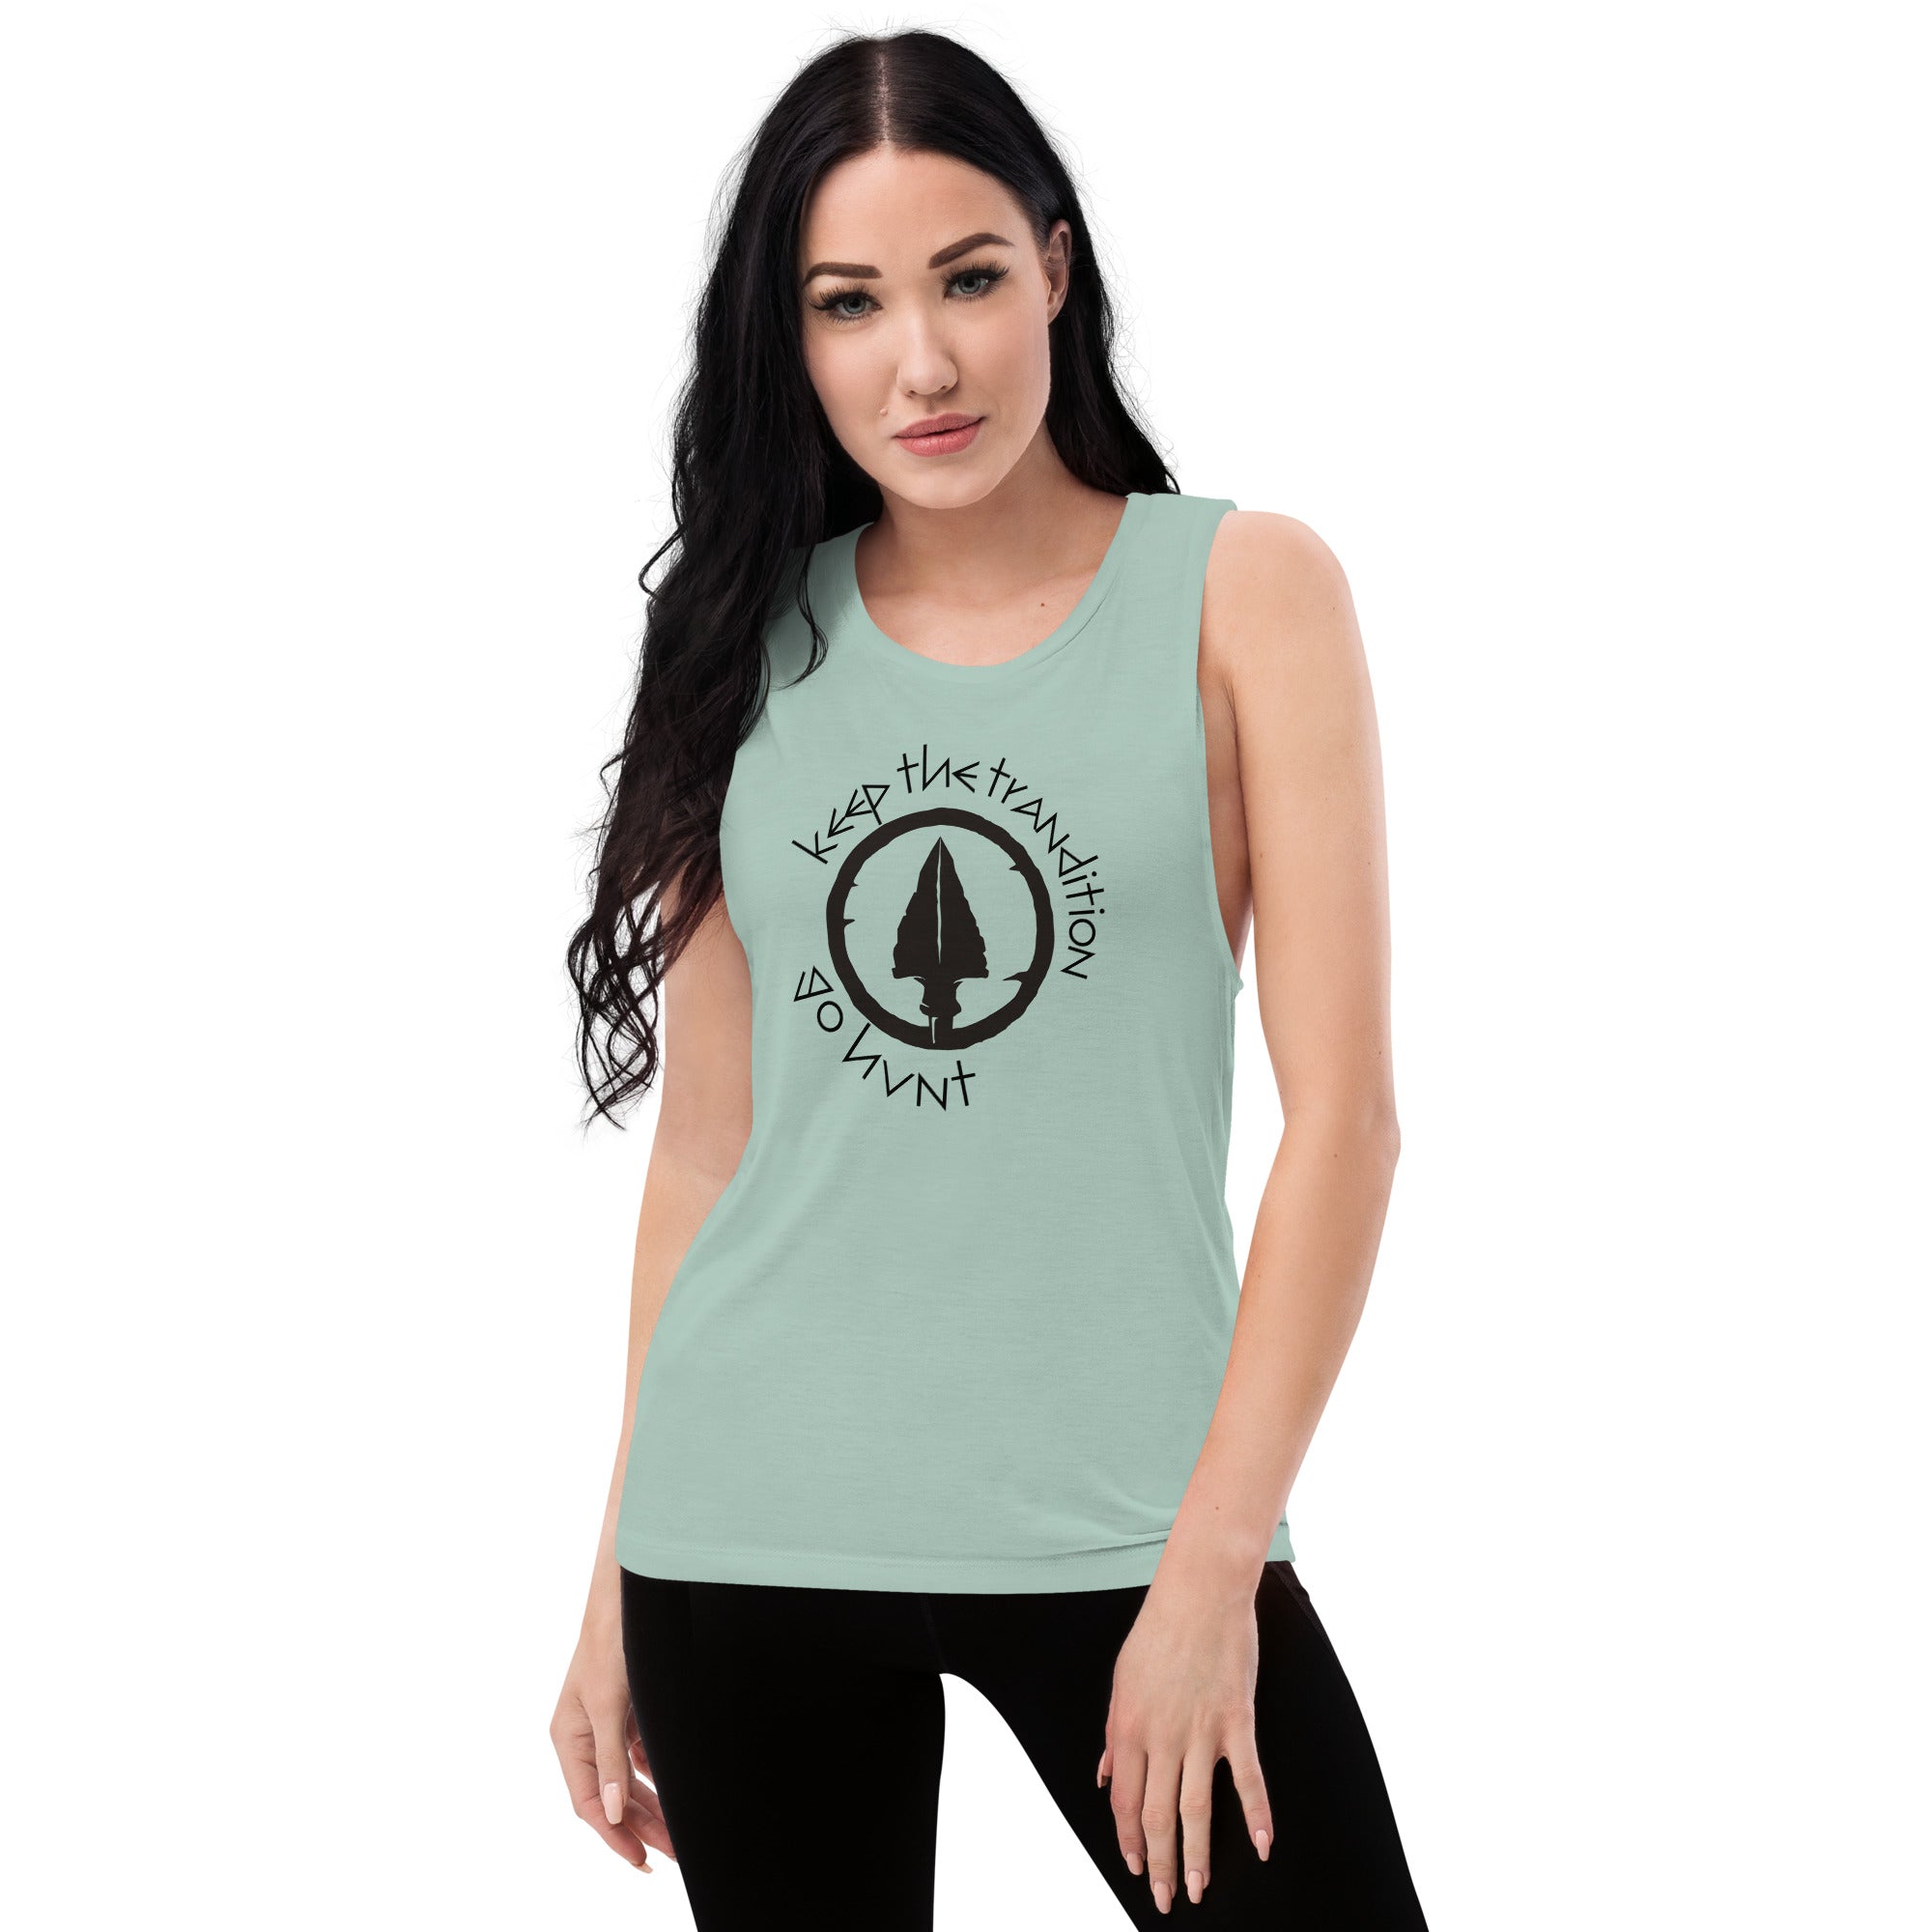 Keep The Tradition Women's Muscle Tank - Go Hunt